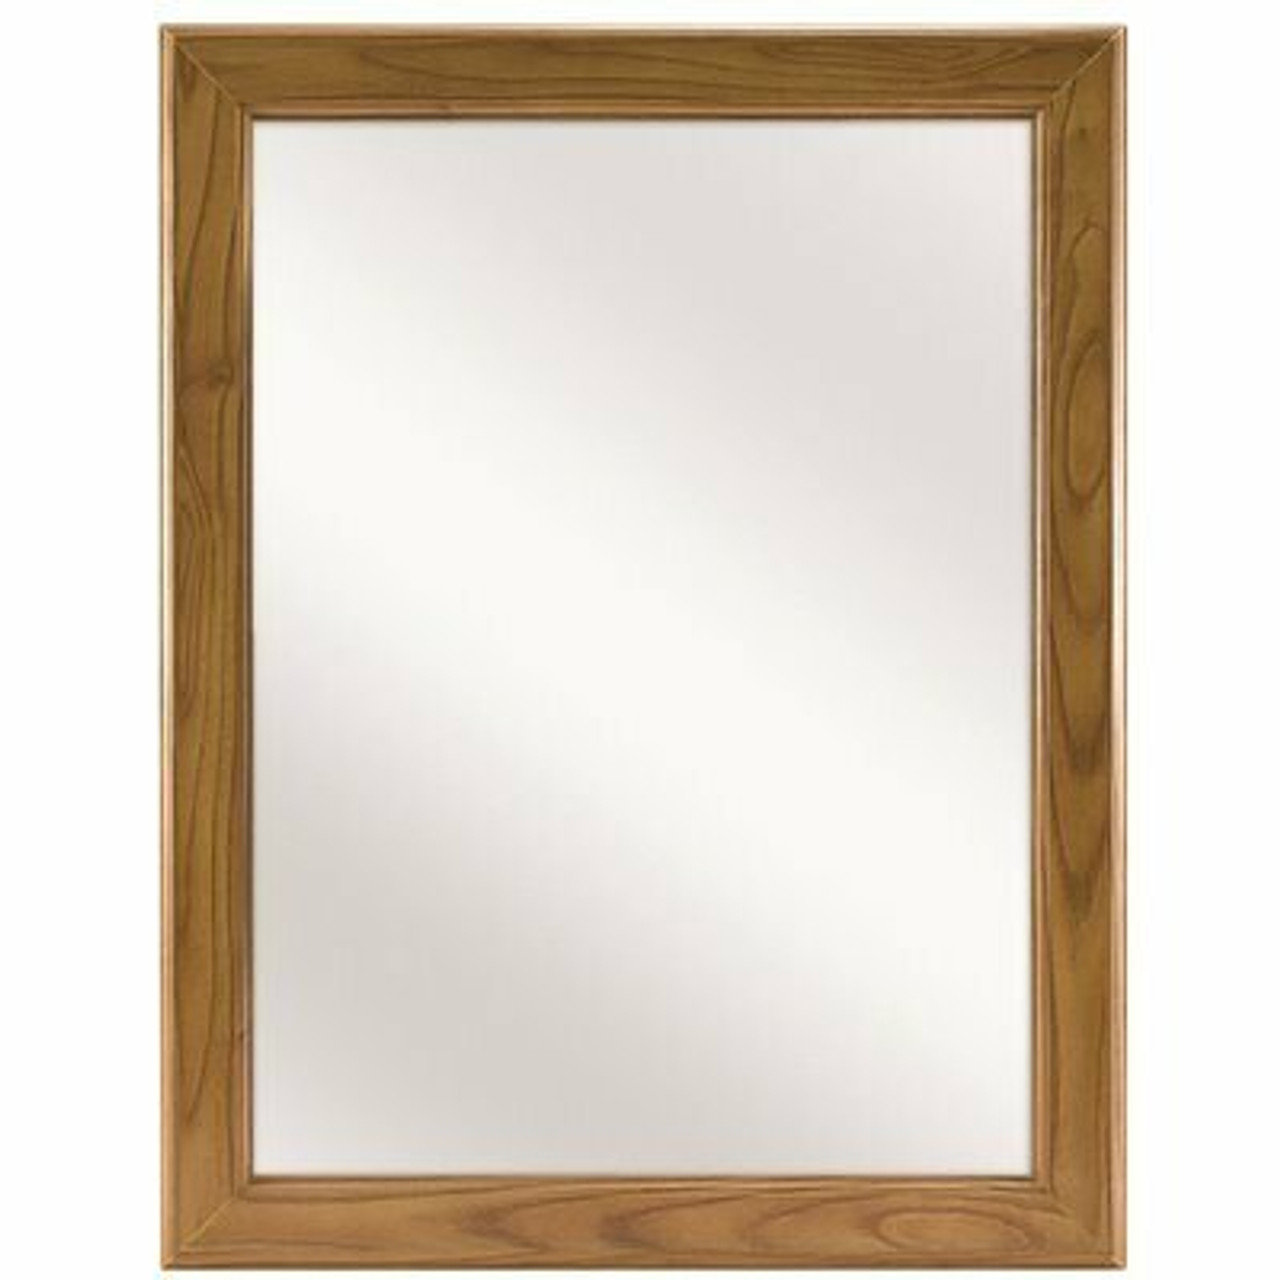 Glacier Bay 15-1/8 In. W X 19-1/4 In. H Framed Recessed Or Surface-Mount Bathroom Medicine Cabinet In Oak With Mirror